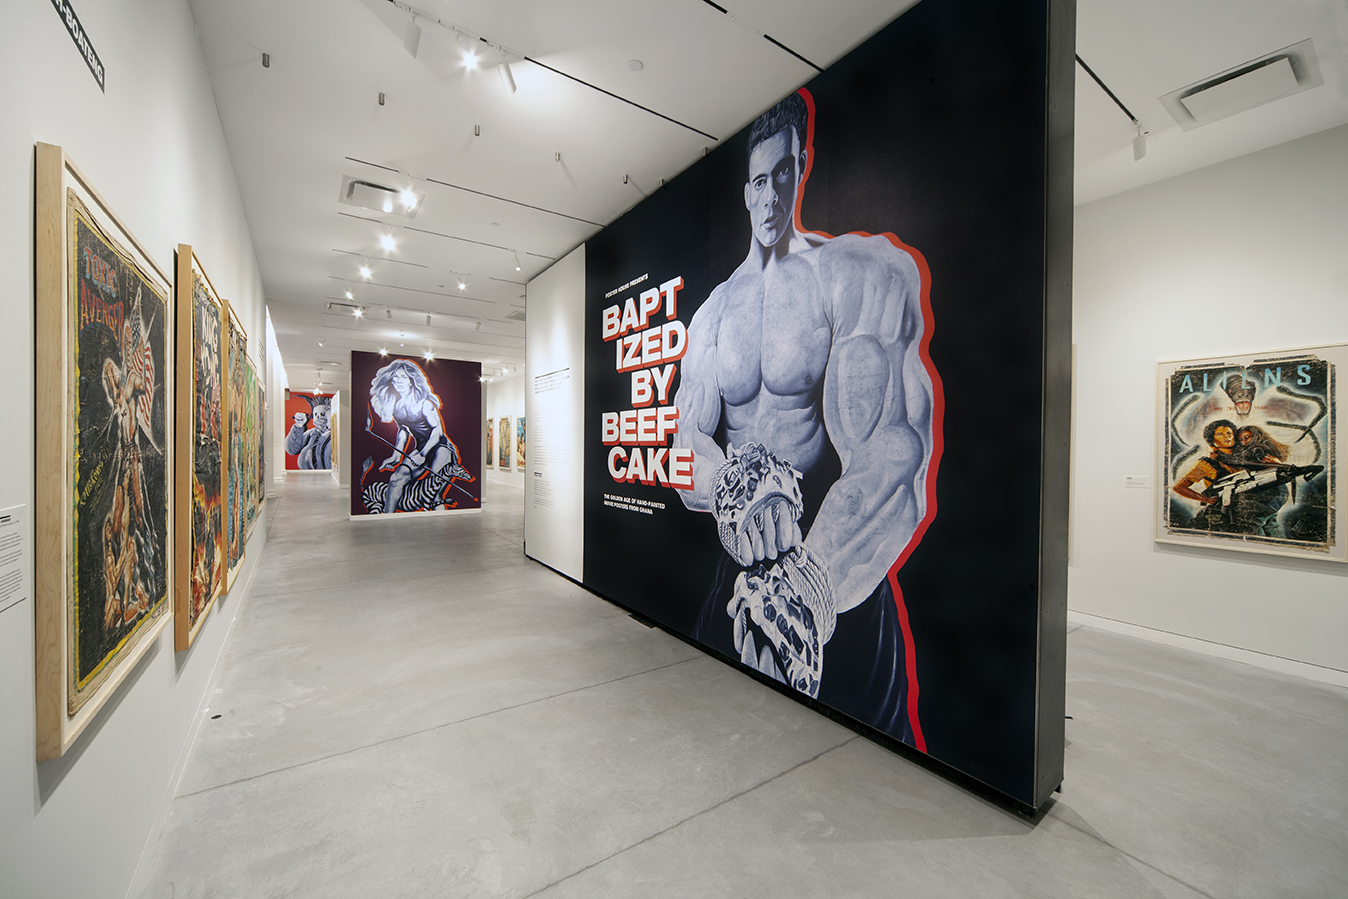 Baptized By Beefcake exhibition highlighting a larger than life, super muscled, Van Damme inlaid on a black freestanding wall.